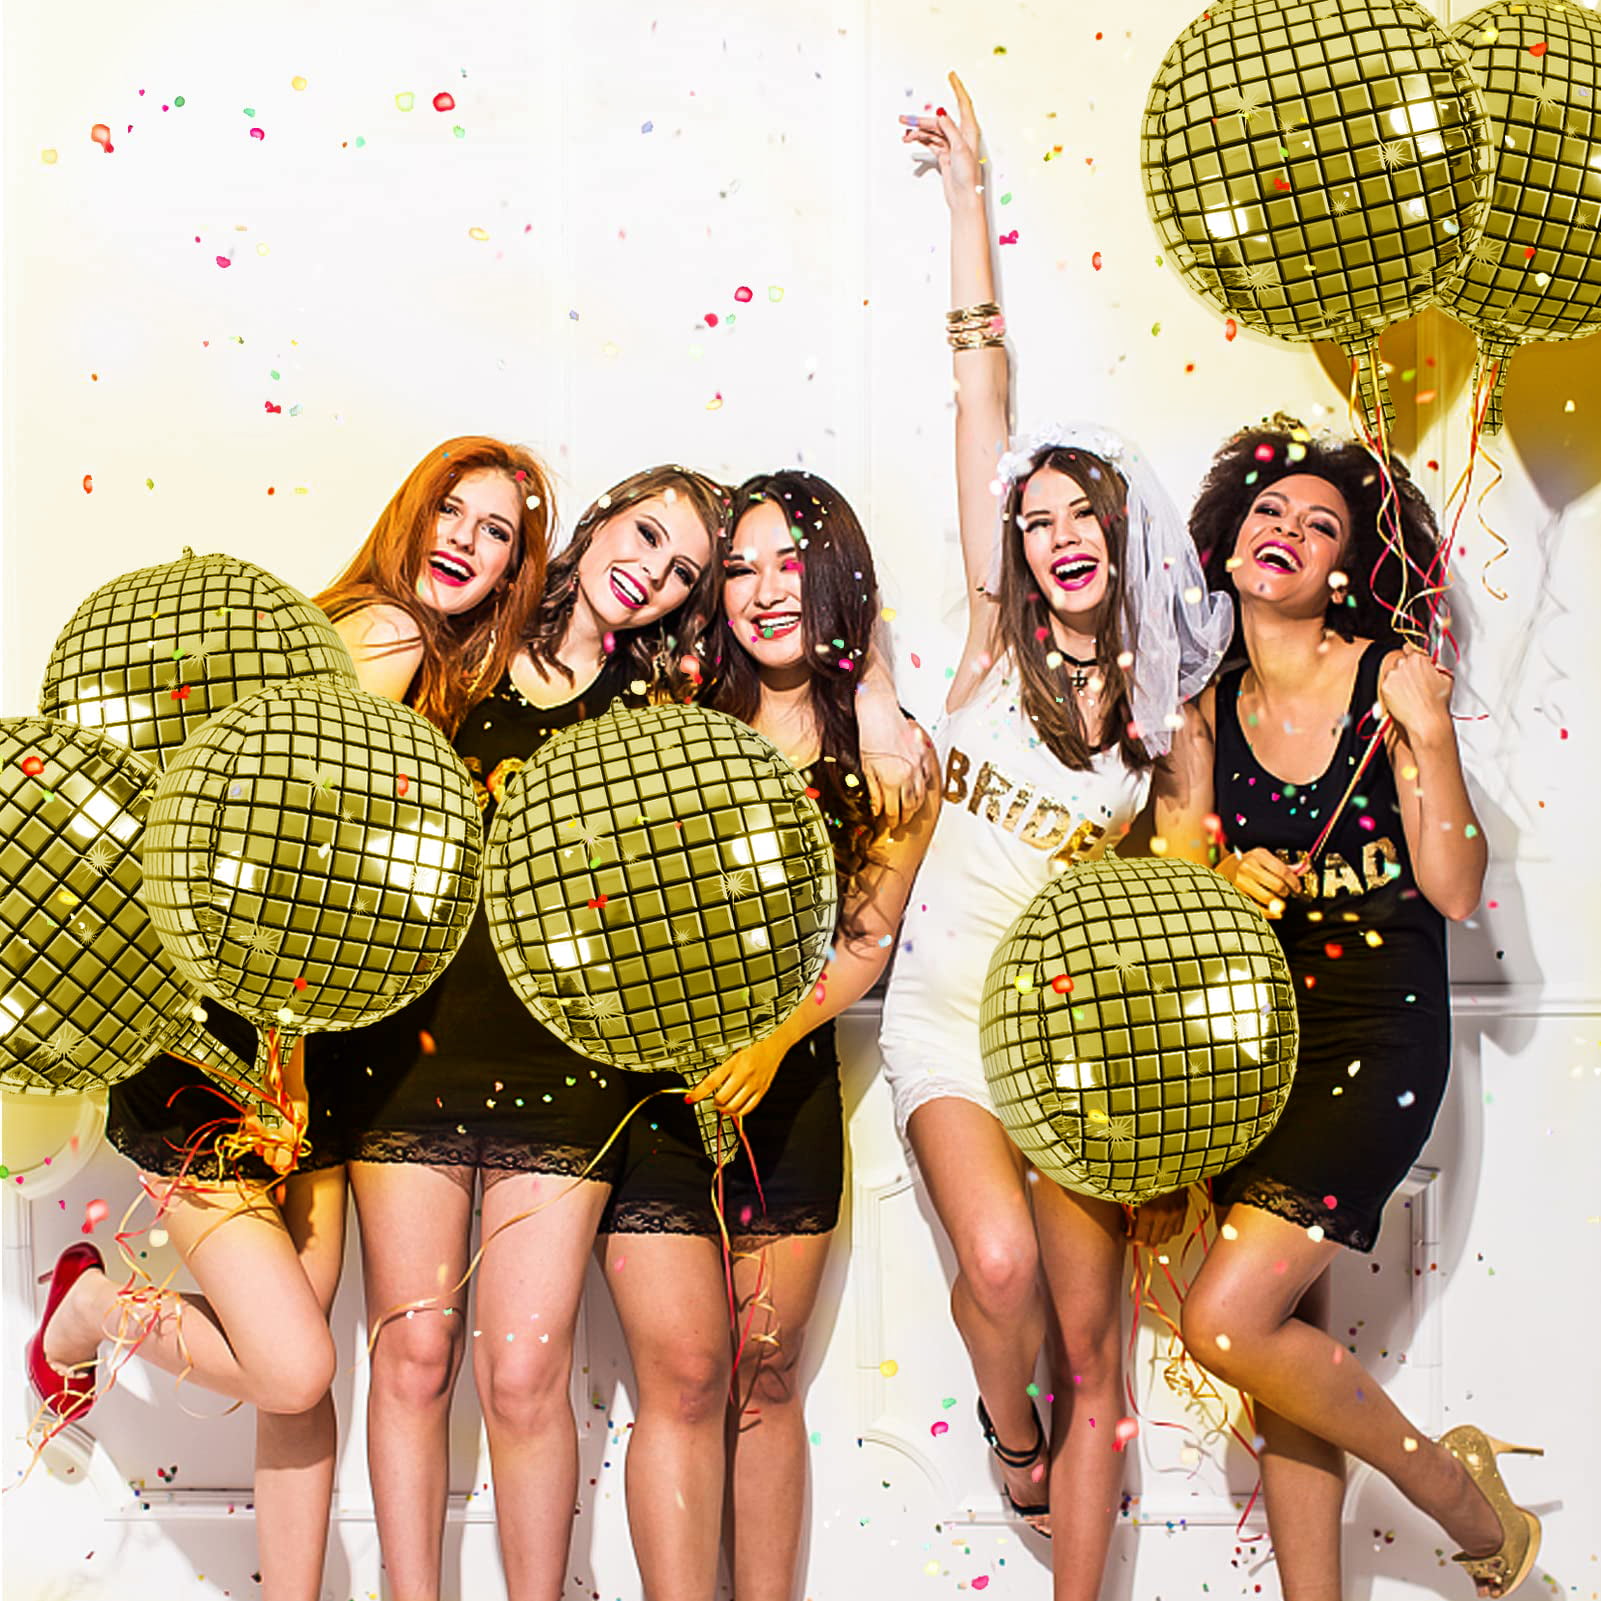 6Pack Gold Disco Ball Balloons Disco Golden Balloon Balls Decor 70s Party  Decorations 22 Inch Mirror Metallic Large 4D Foil Helium Orbz Ballons for  Music Dance Party Theme 